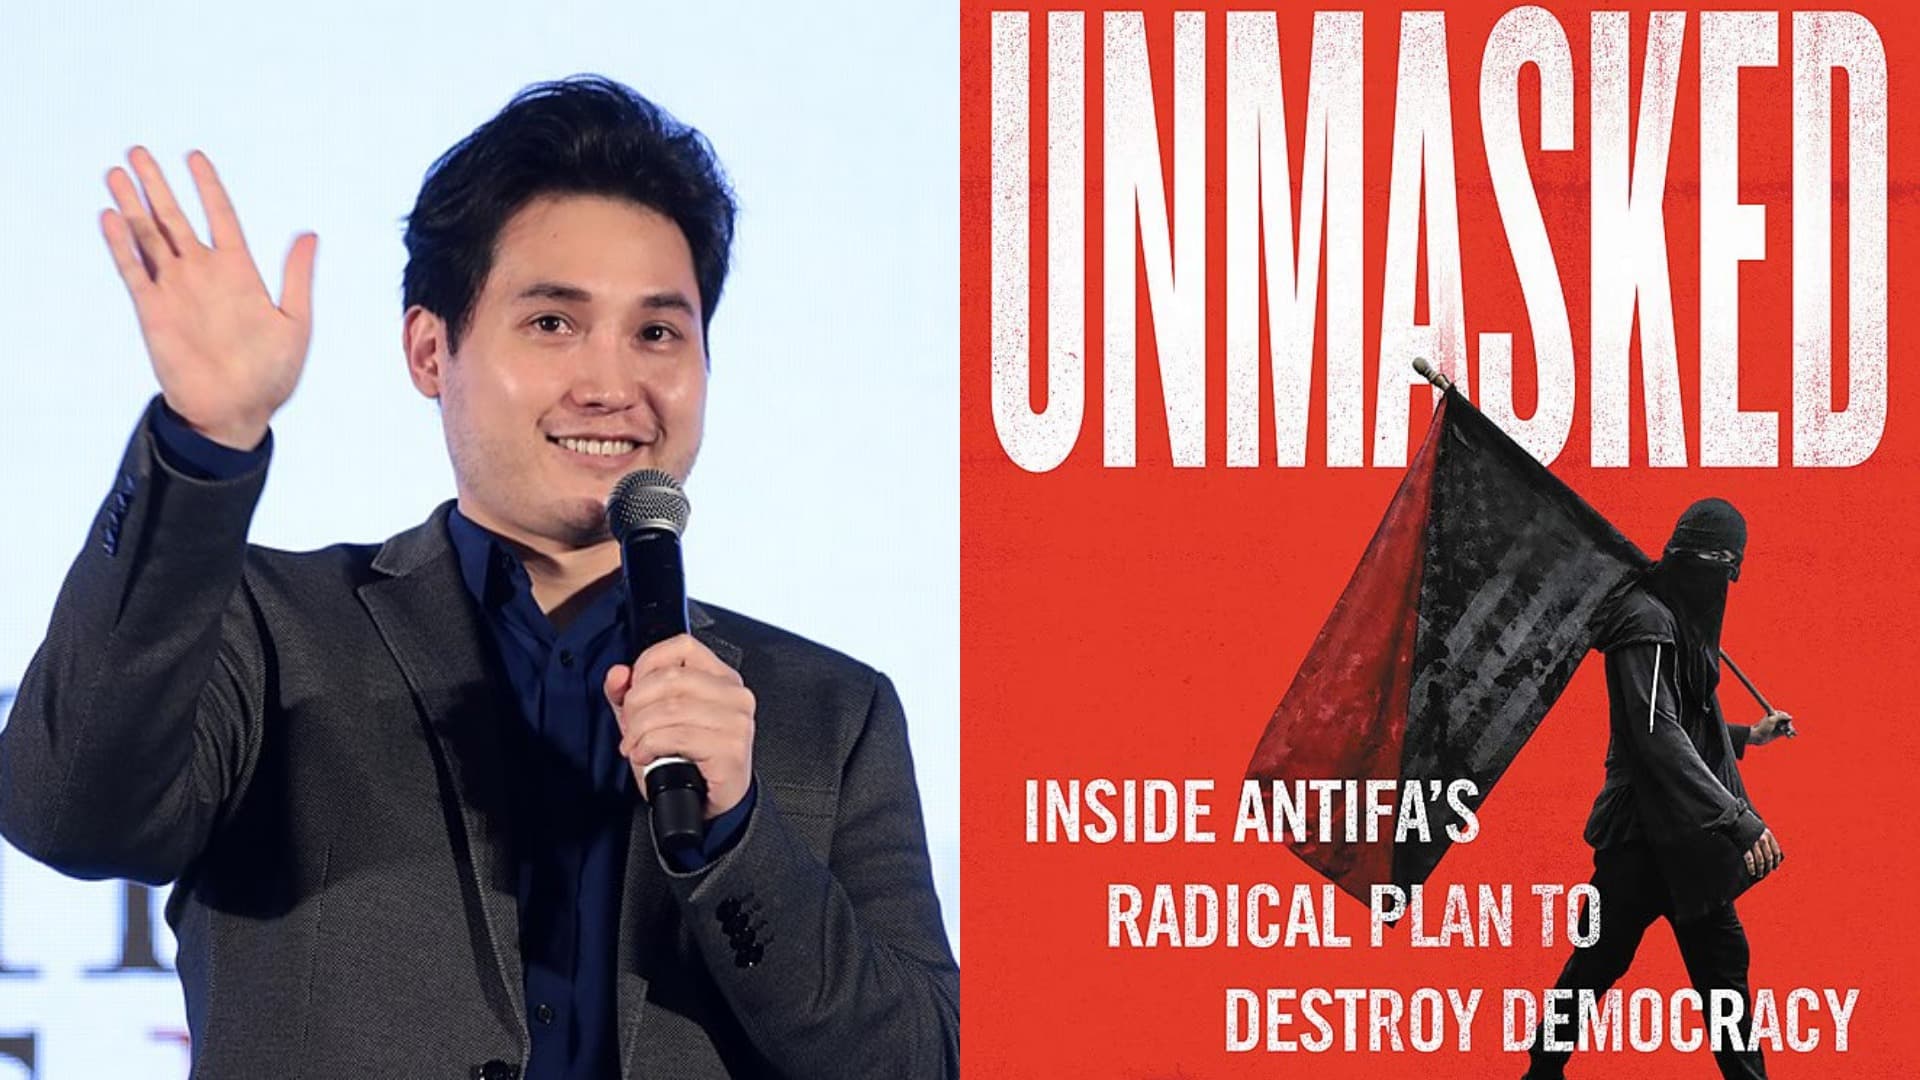 Andy Ngo's 'Unmasked' book on Antifa won't be sold in Powell's following protests